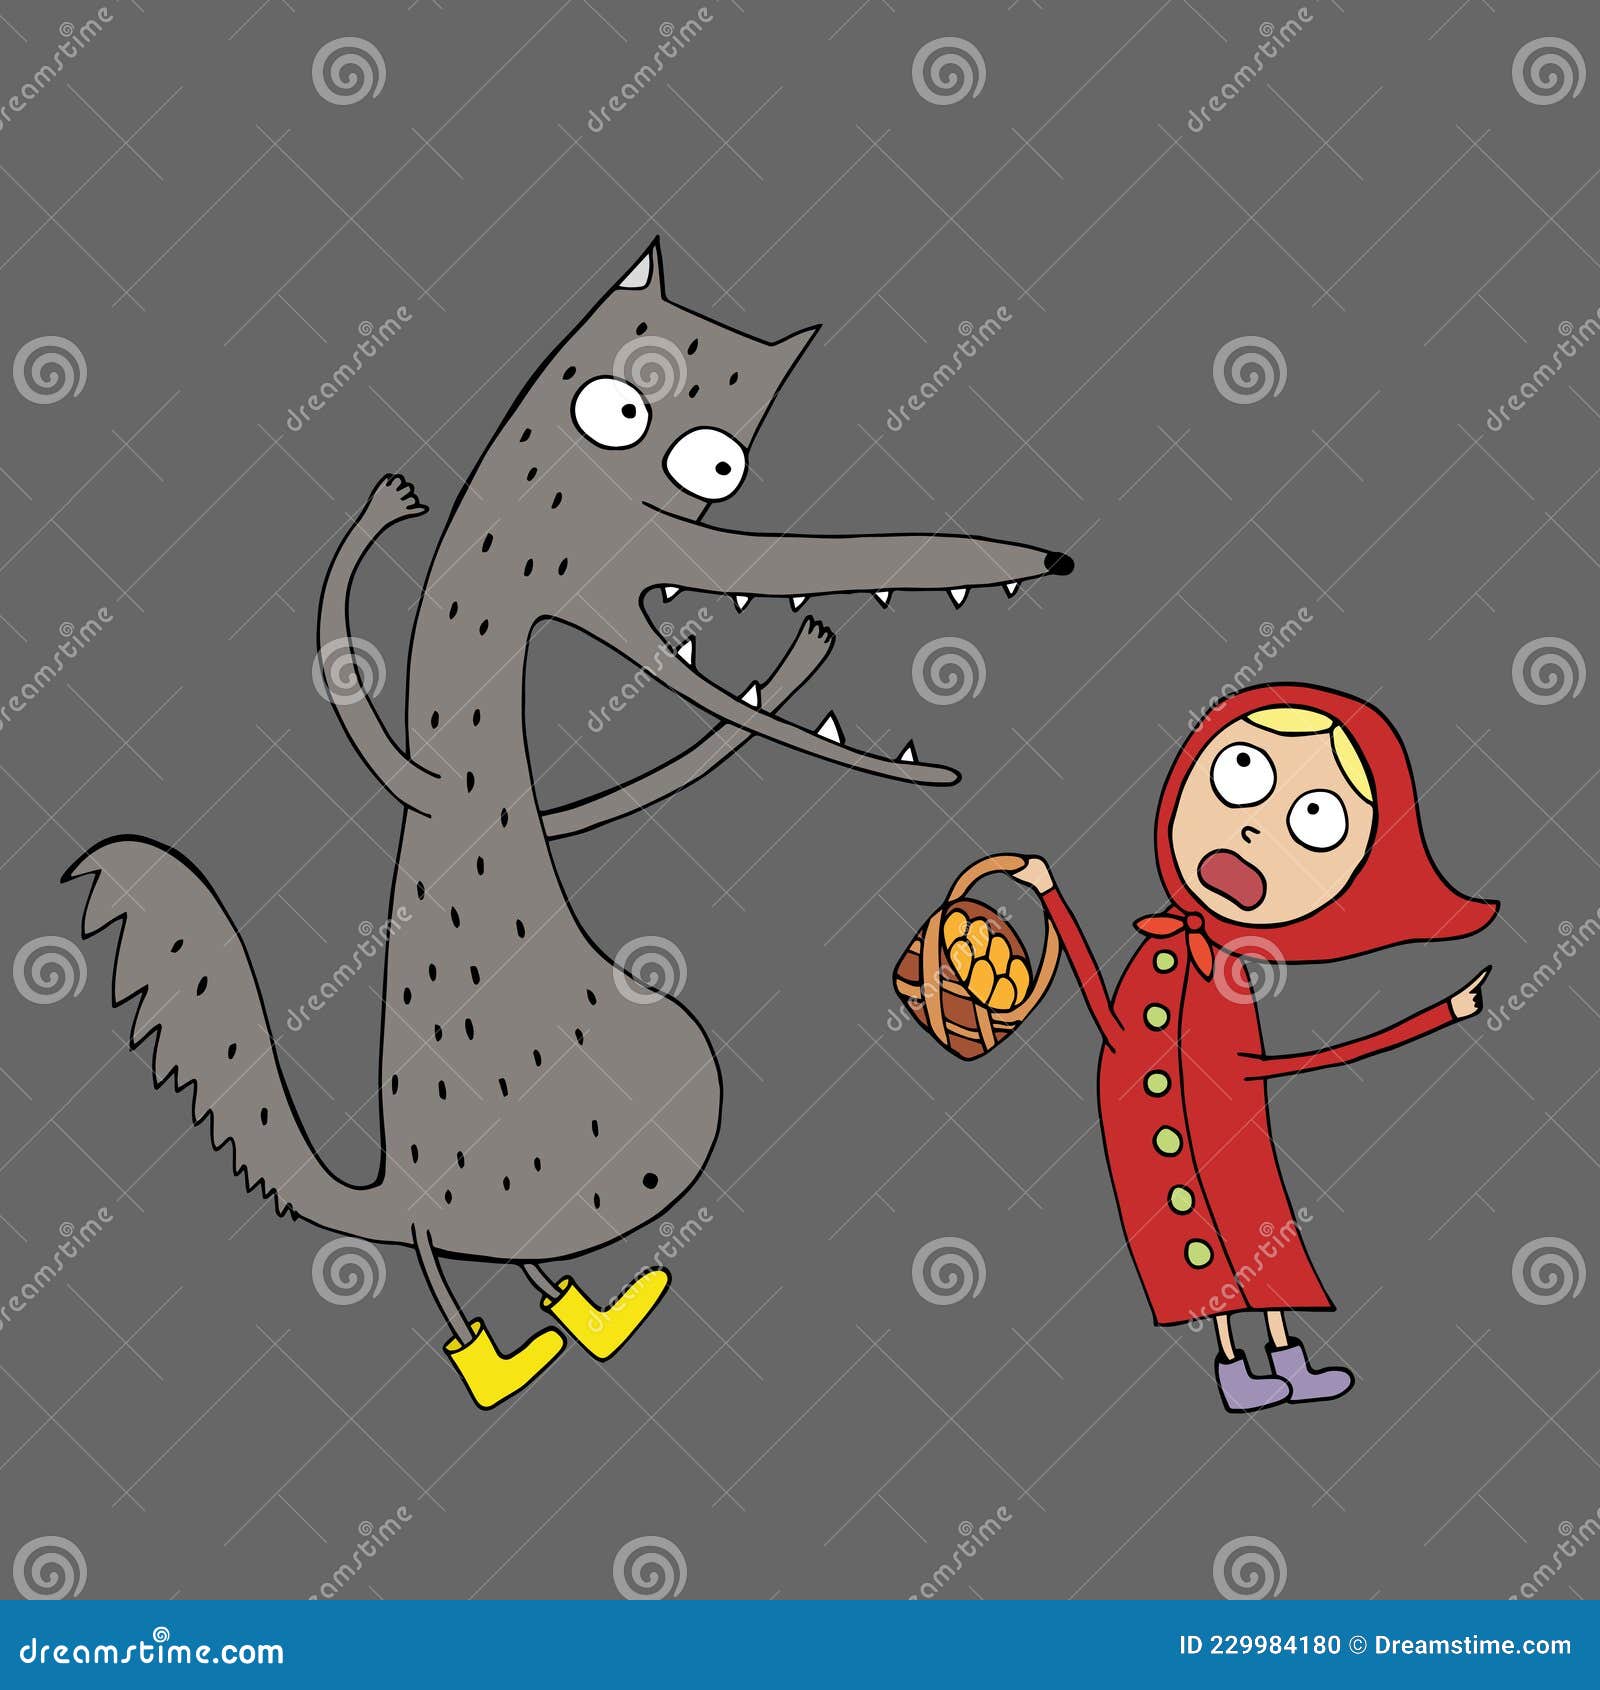 Illustration for a Children S Book. Little Red Riding Hood and Gray Wolf.  Vector. Drawn by Hand in Doodle Style Stock Vector - Illustration of  background, tree: 229984180